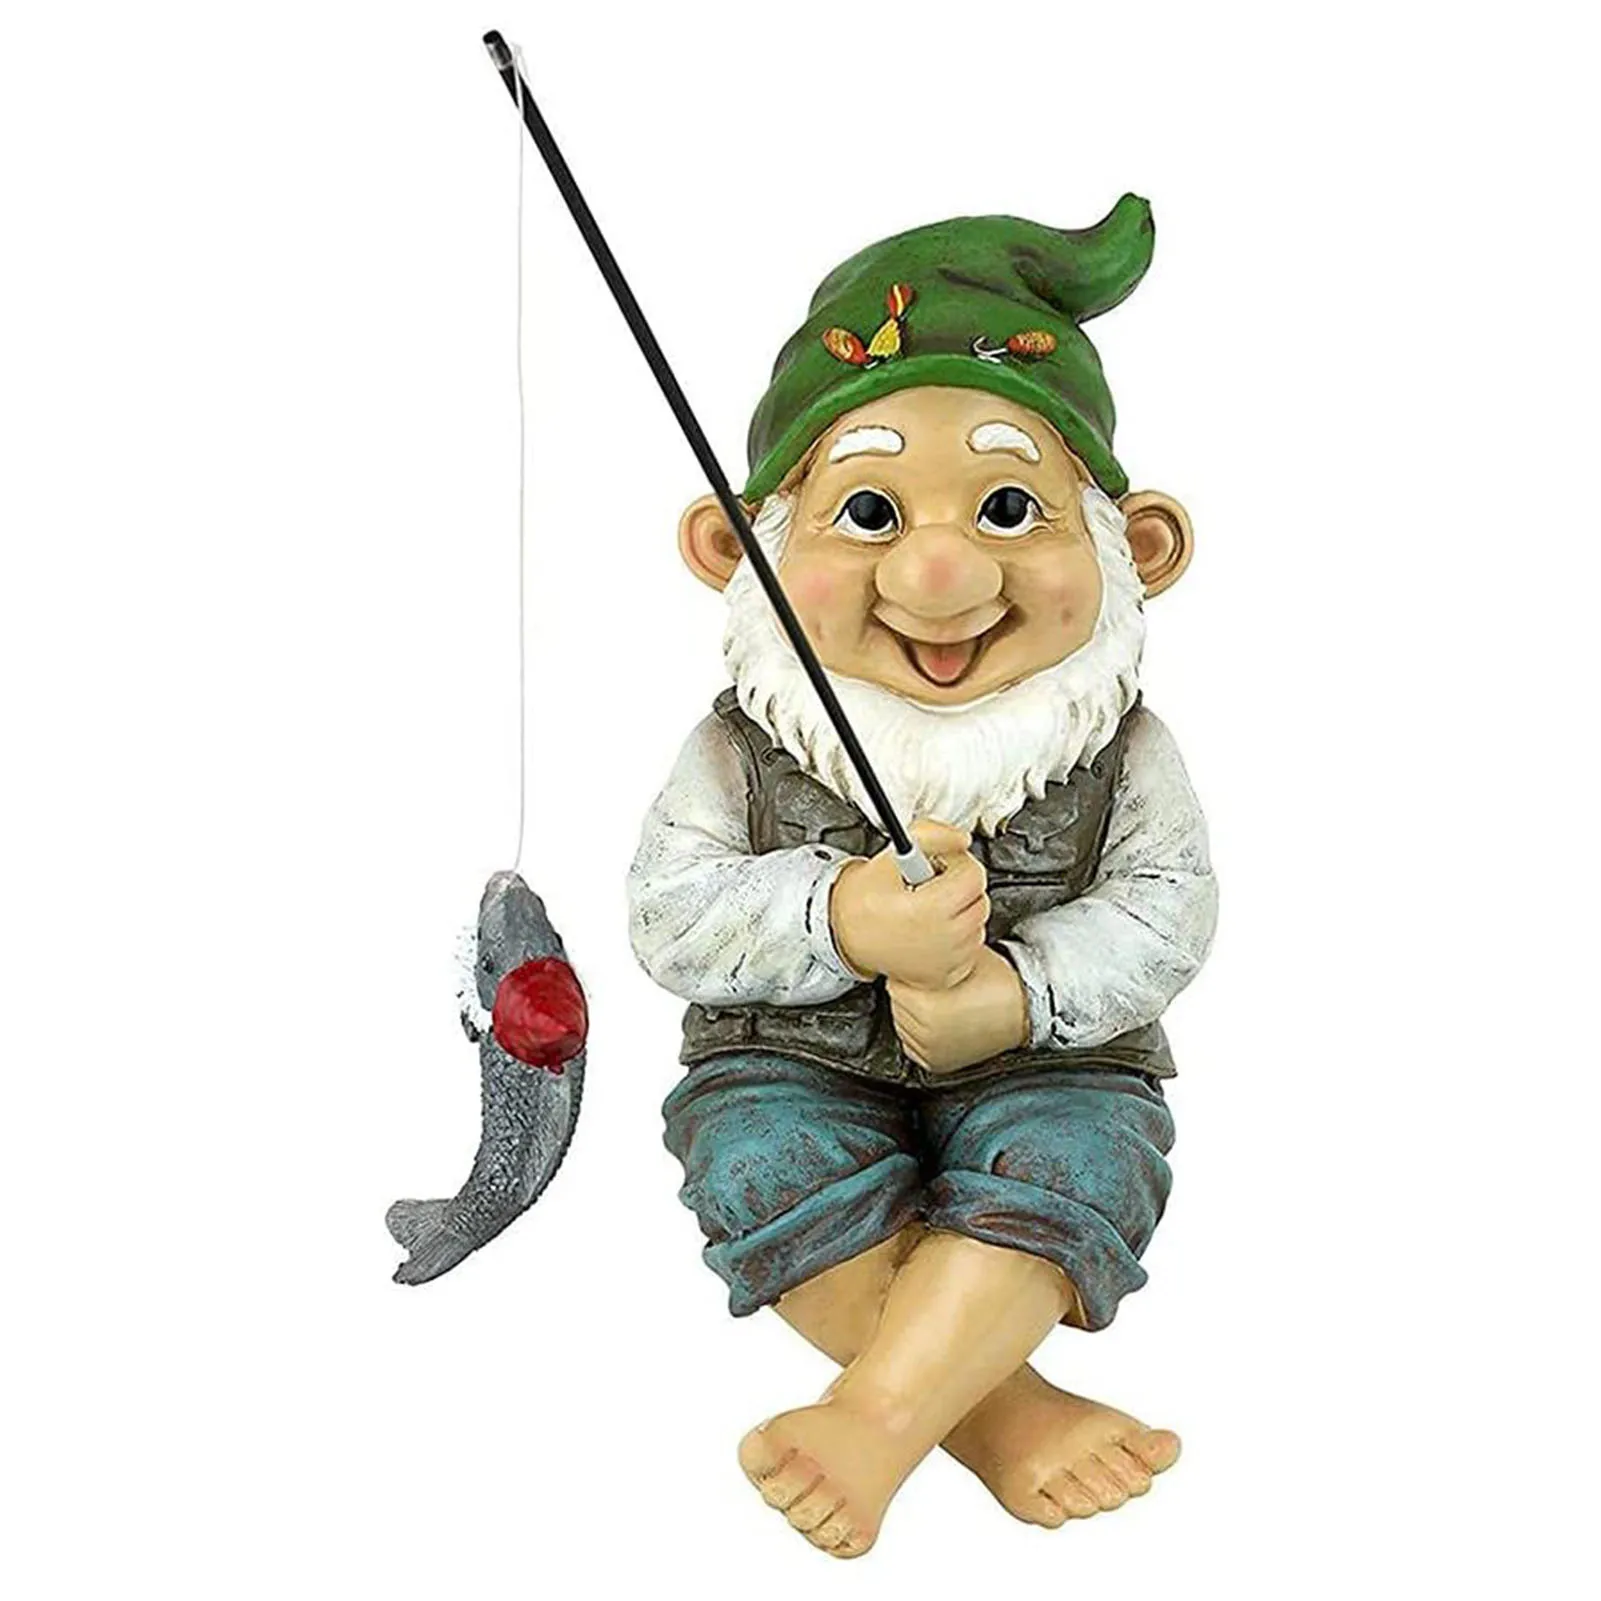 

Fishing Gnome Sitter Statue Ziggy The Fishing Gnome Sitter Funny Lawn Dwarf Statues Outdoor Landscape Ornaments For Yard Lawn